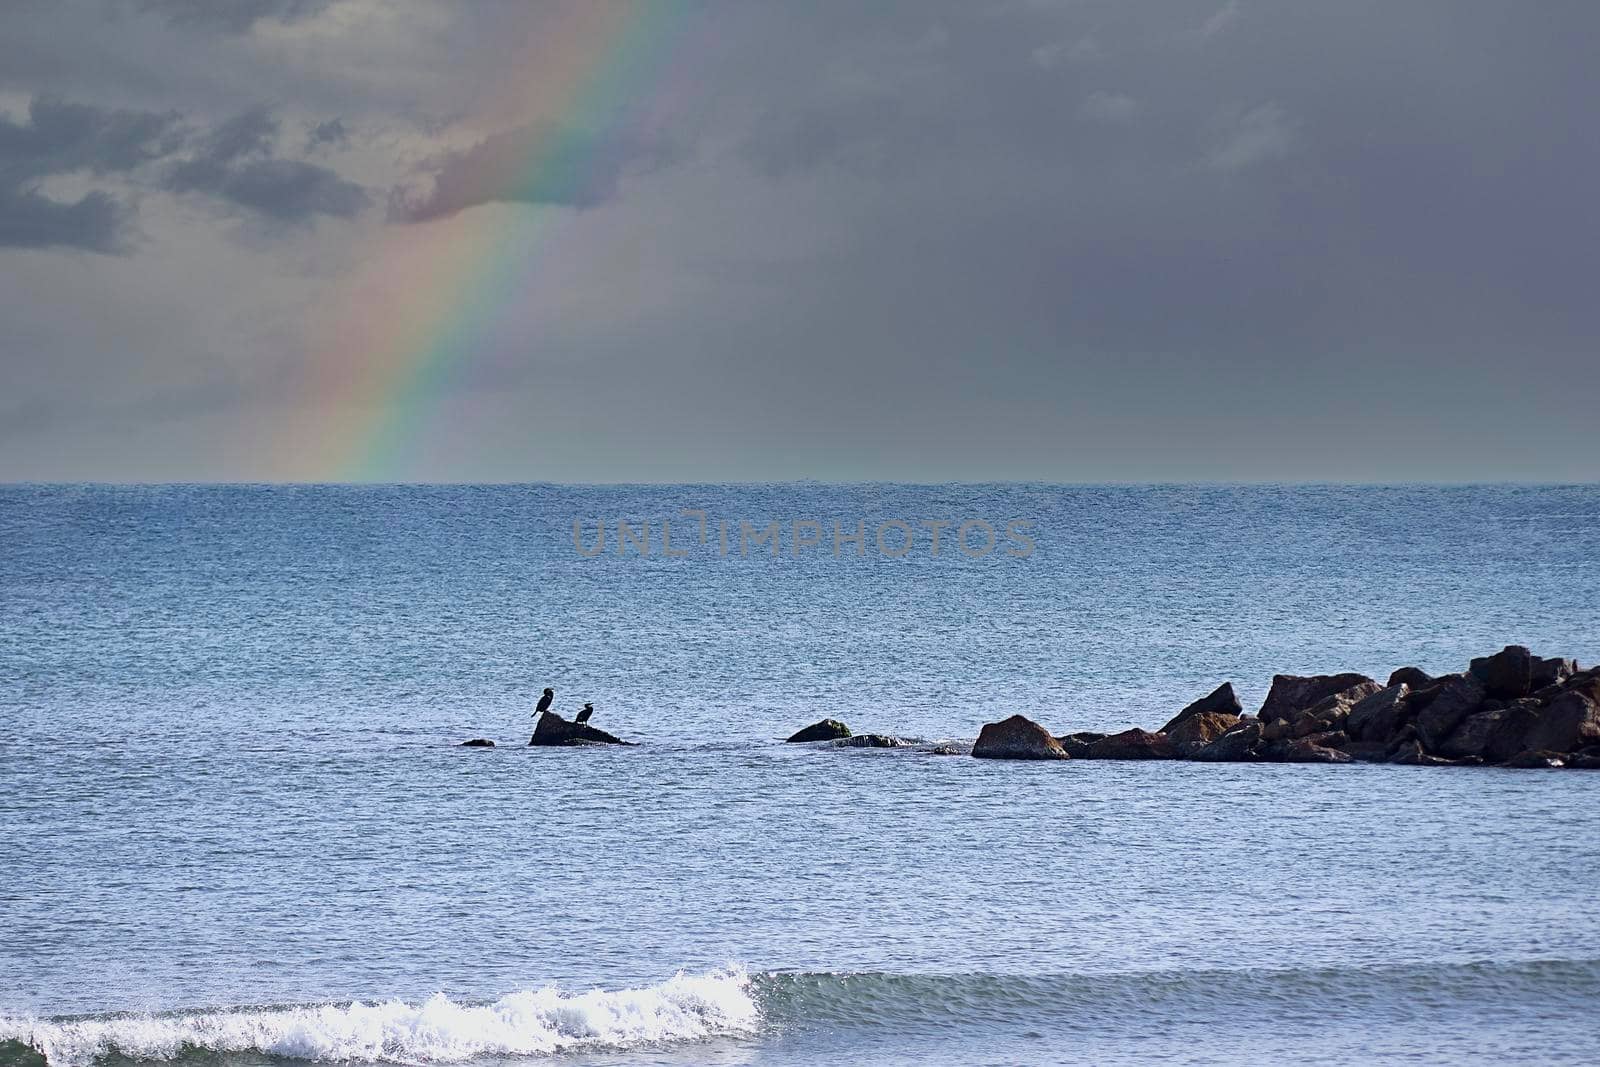 Two birds on a rock in the sea with rainbows. Rocks, calm sea, sky with clouds, minimalist, rocks